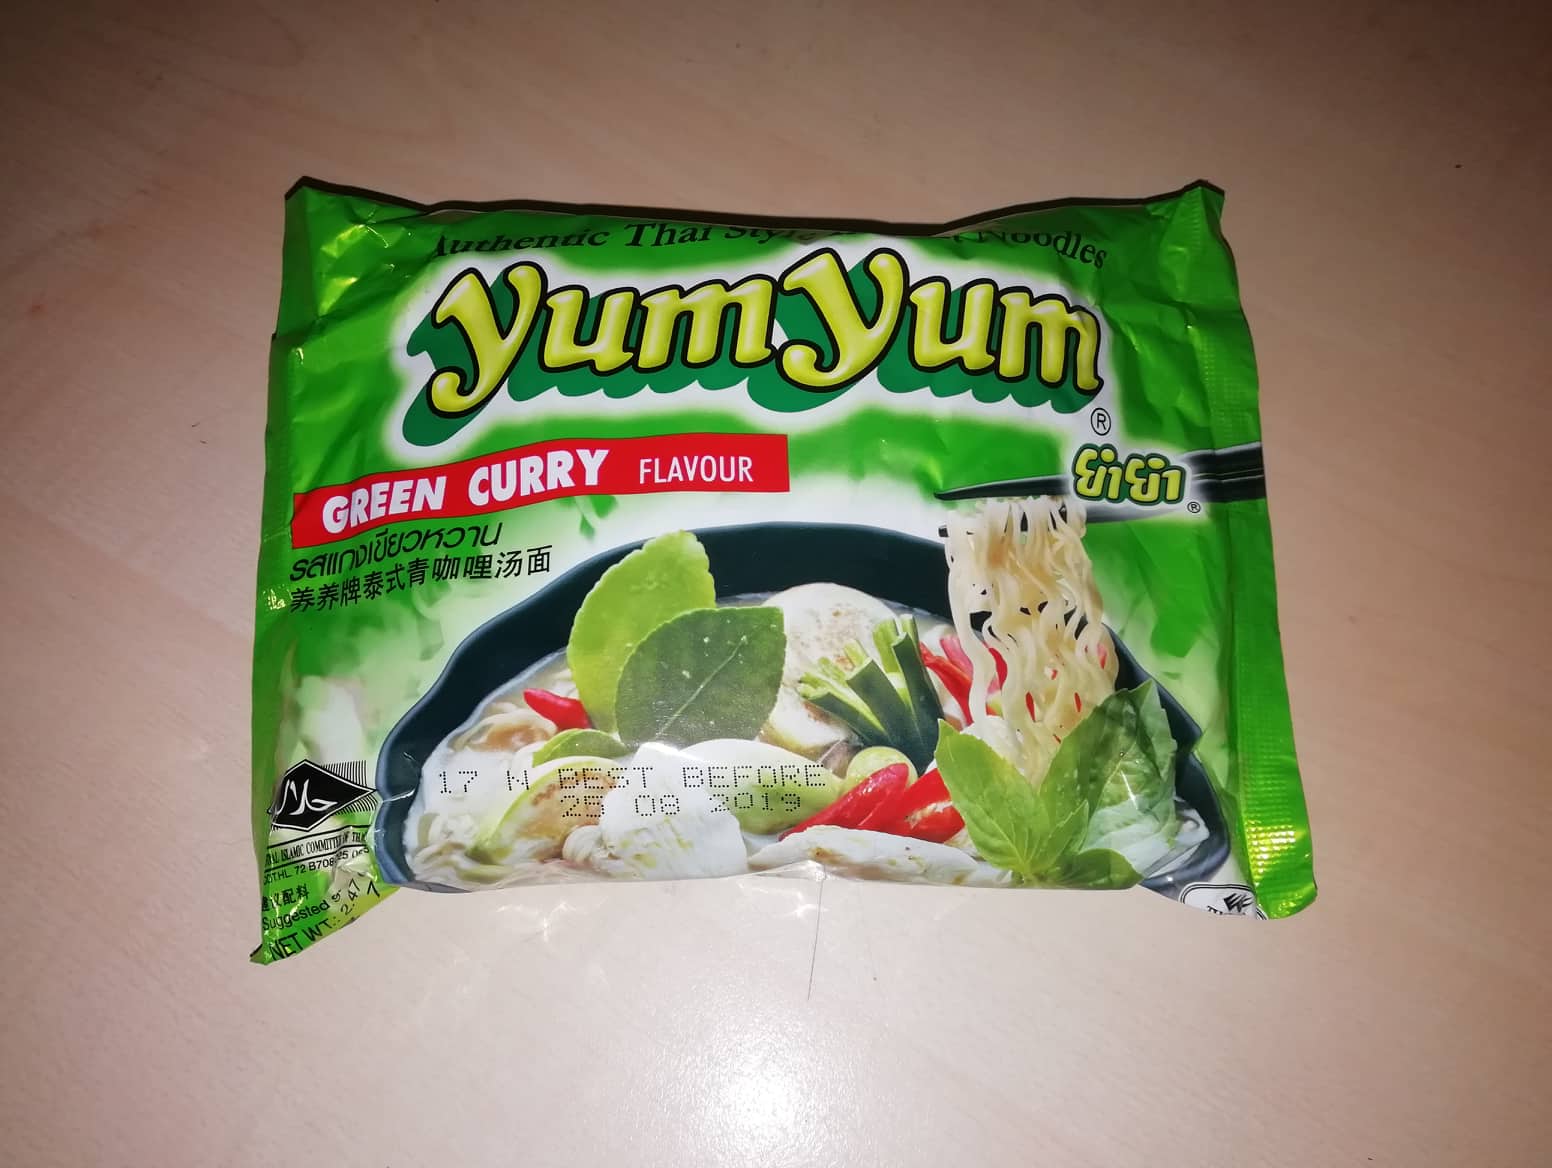 #056: YumYum Authentic Thai Style Instant Noodles "Green Curry Flavour"  (Update 2022)